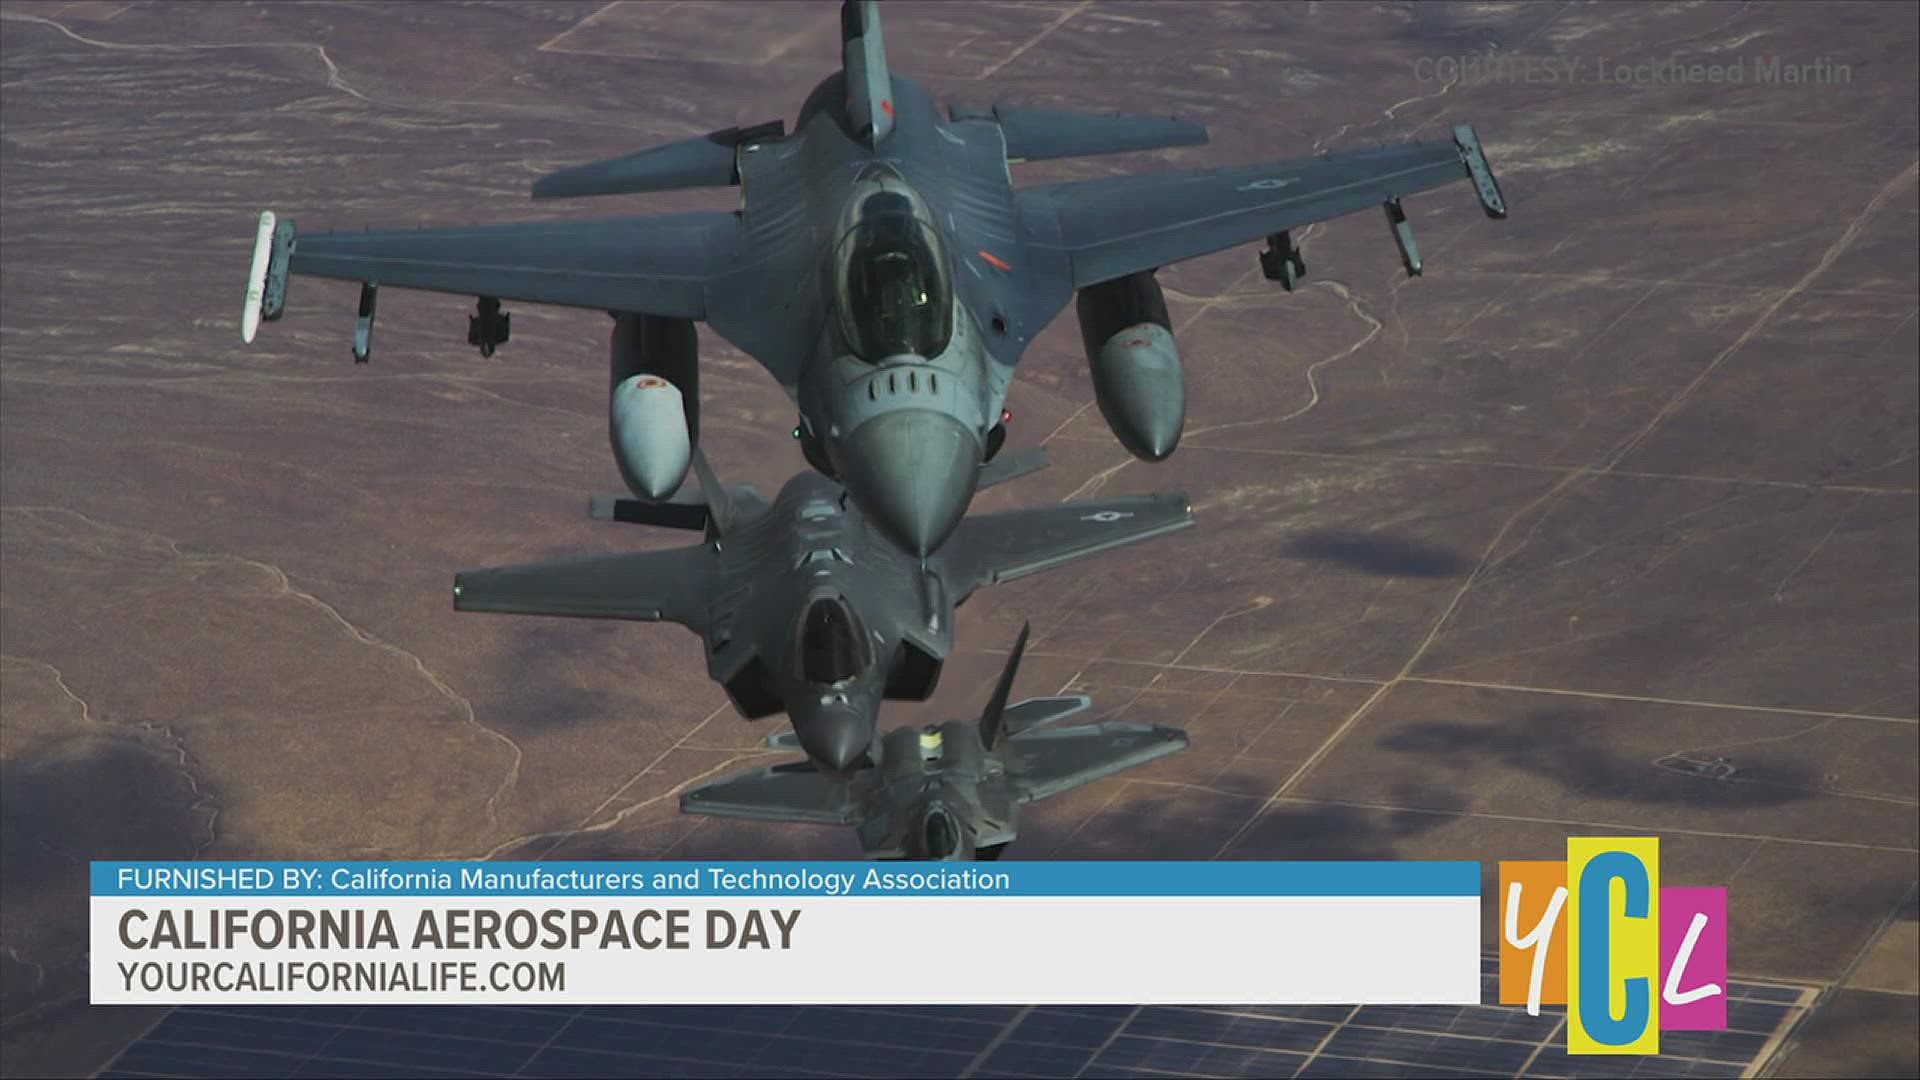 California Aerospace Day is August 3rd and we'll learn about a special event that's raising awareness about the impacts of the aerospace industry.